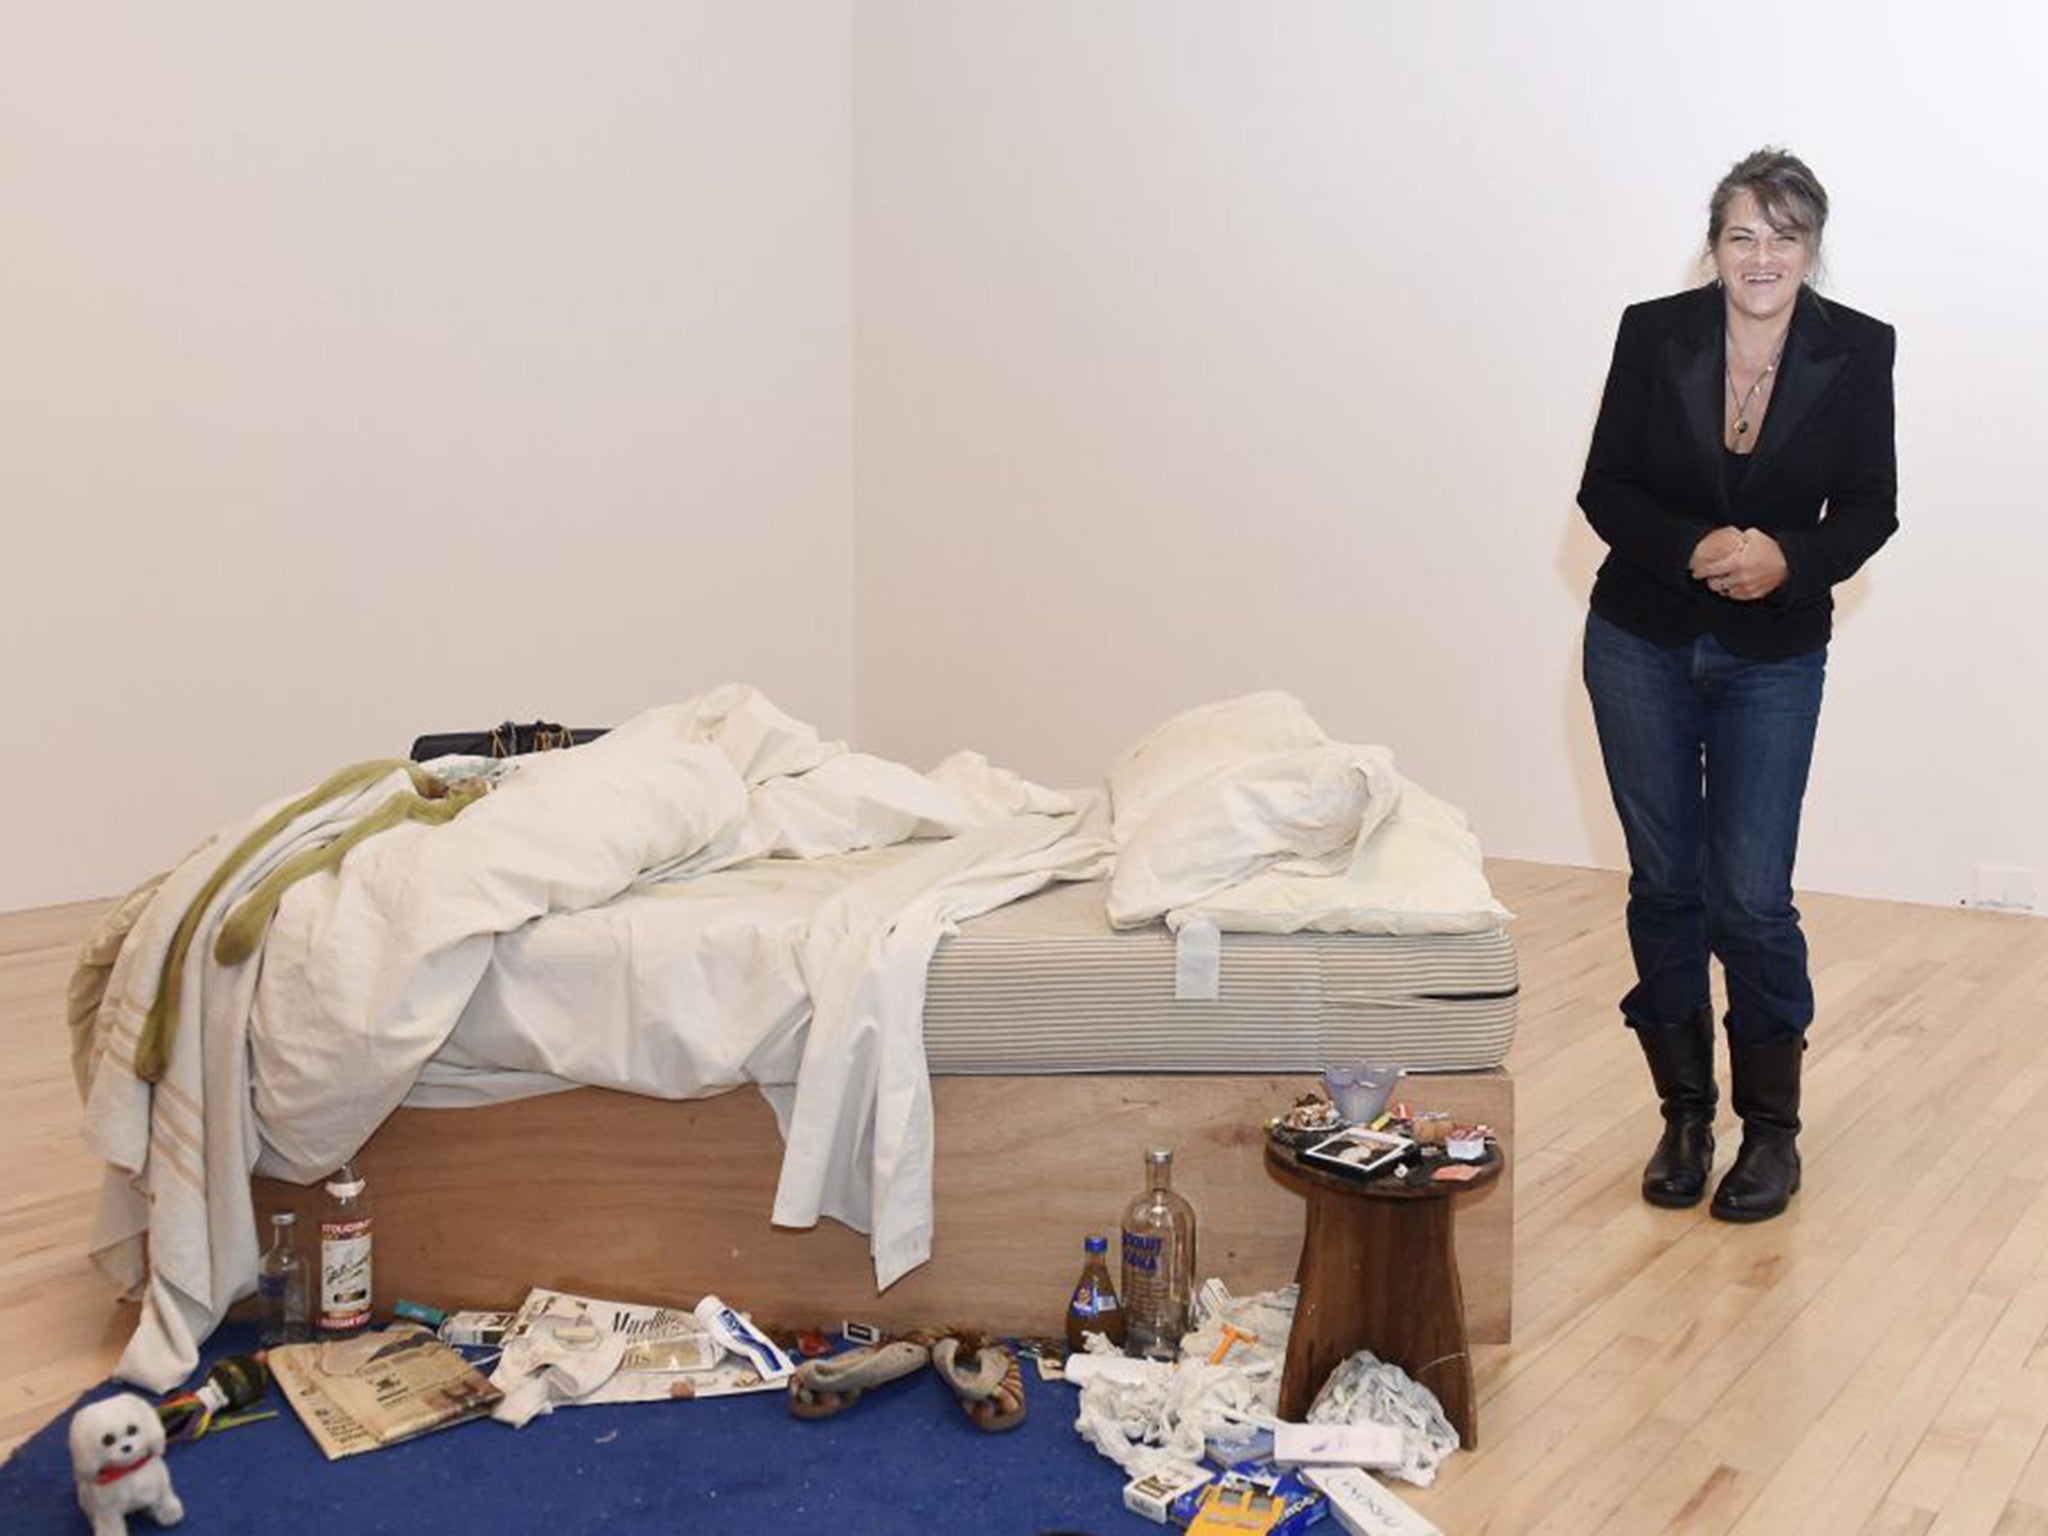 Tracey Emin visits her 1990s work ‘My Bed’ at Tate Britain in London, where it is back on display from today 